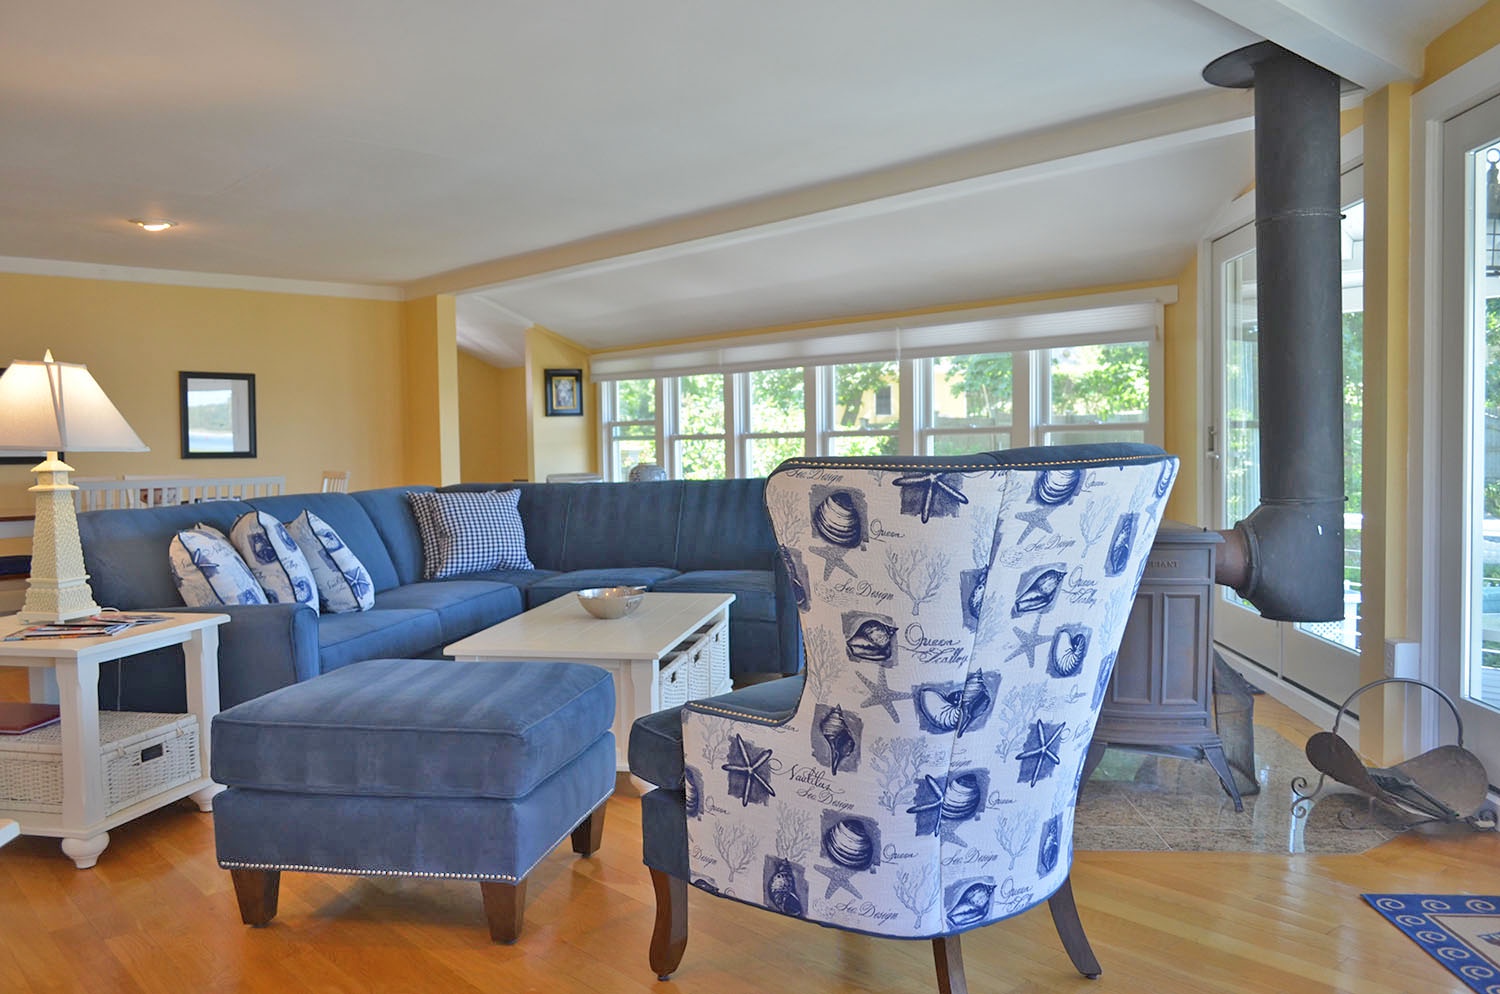 Choose your spot with the comfortable living room seating.